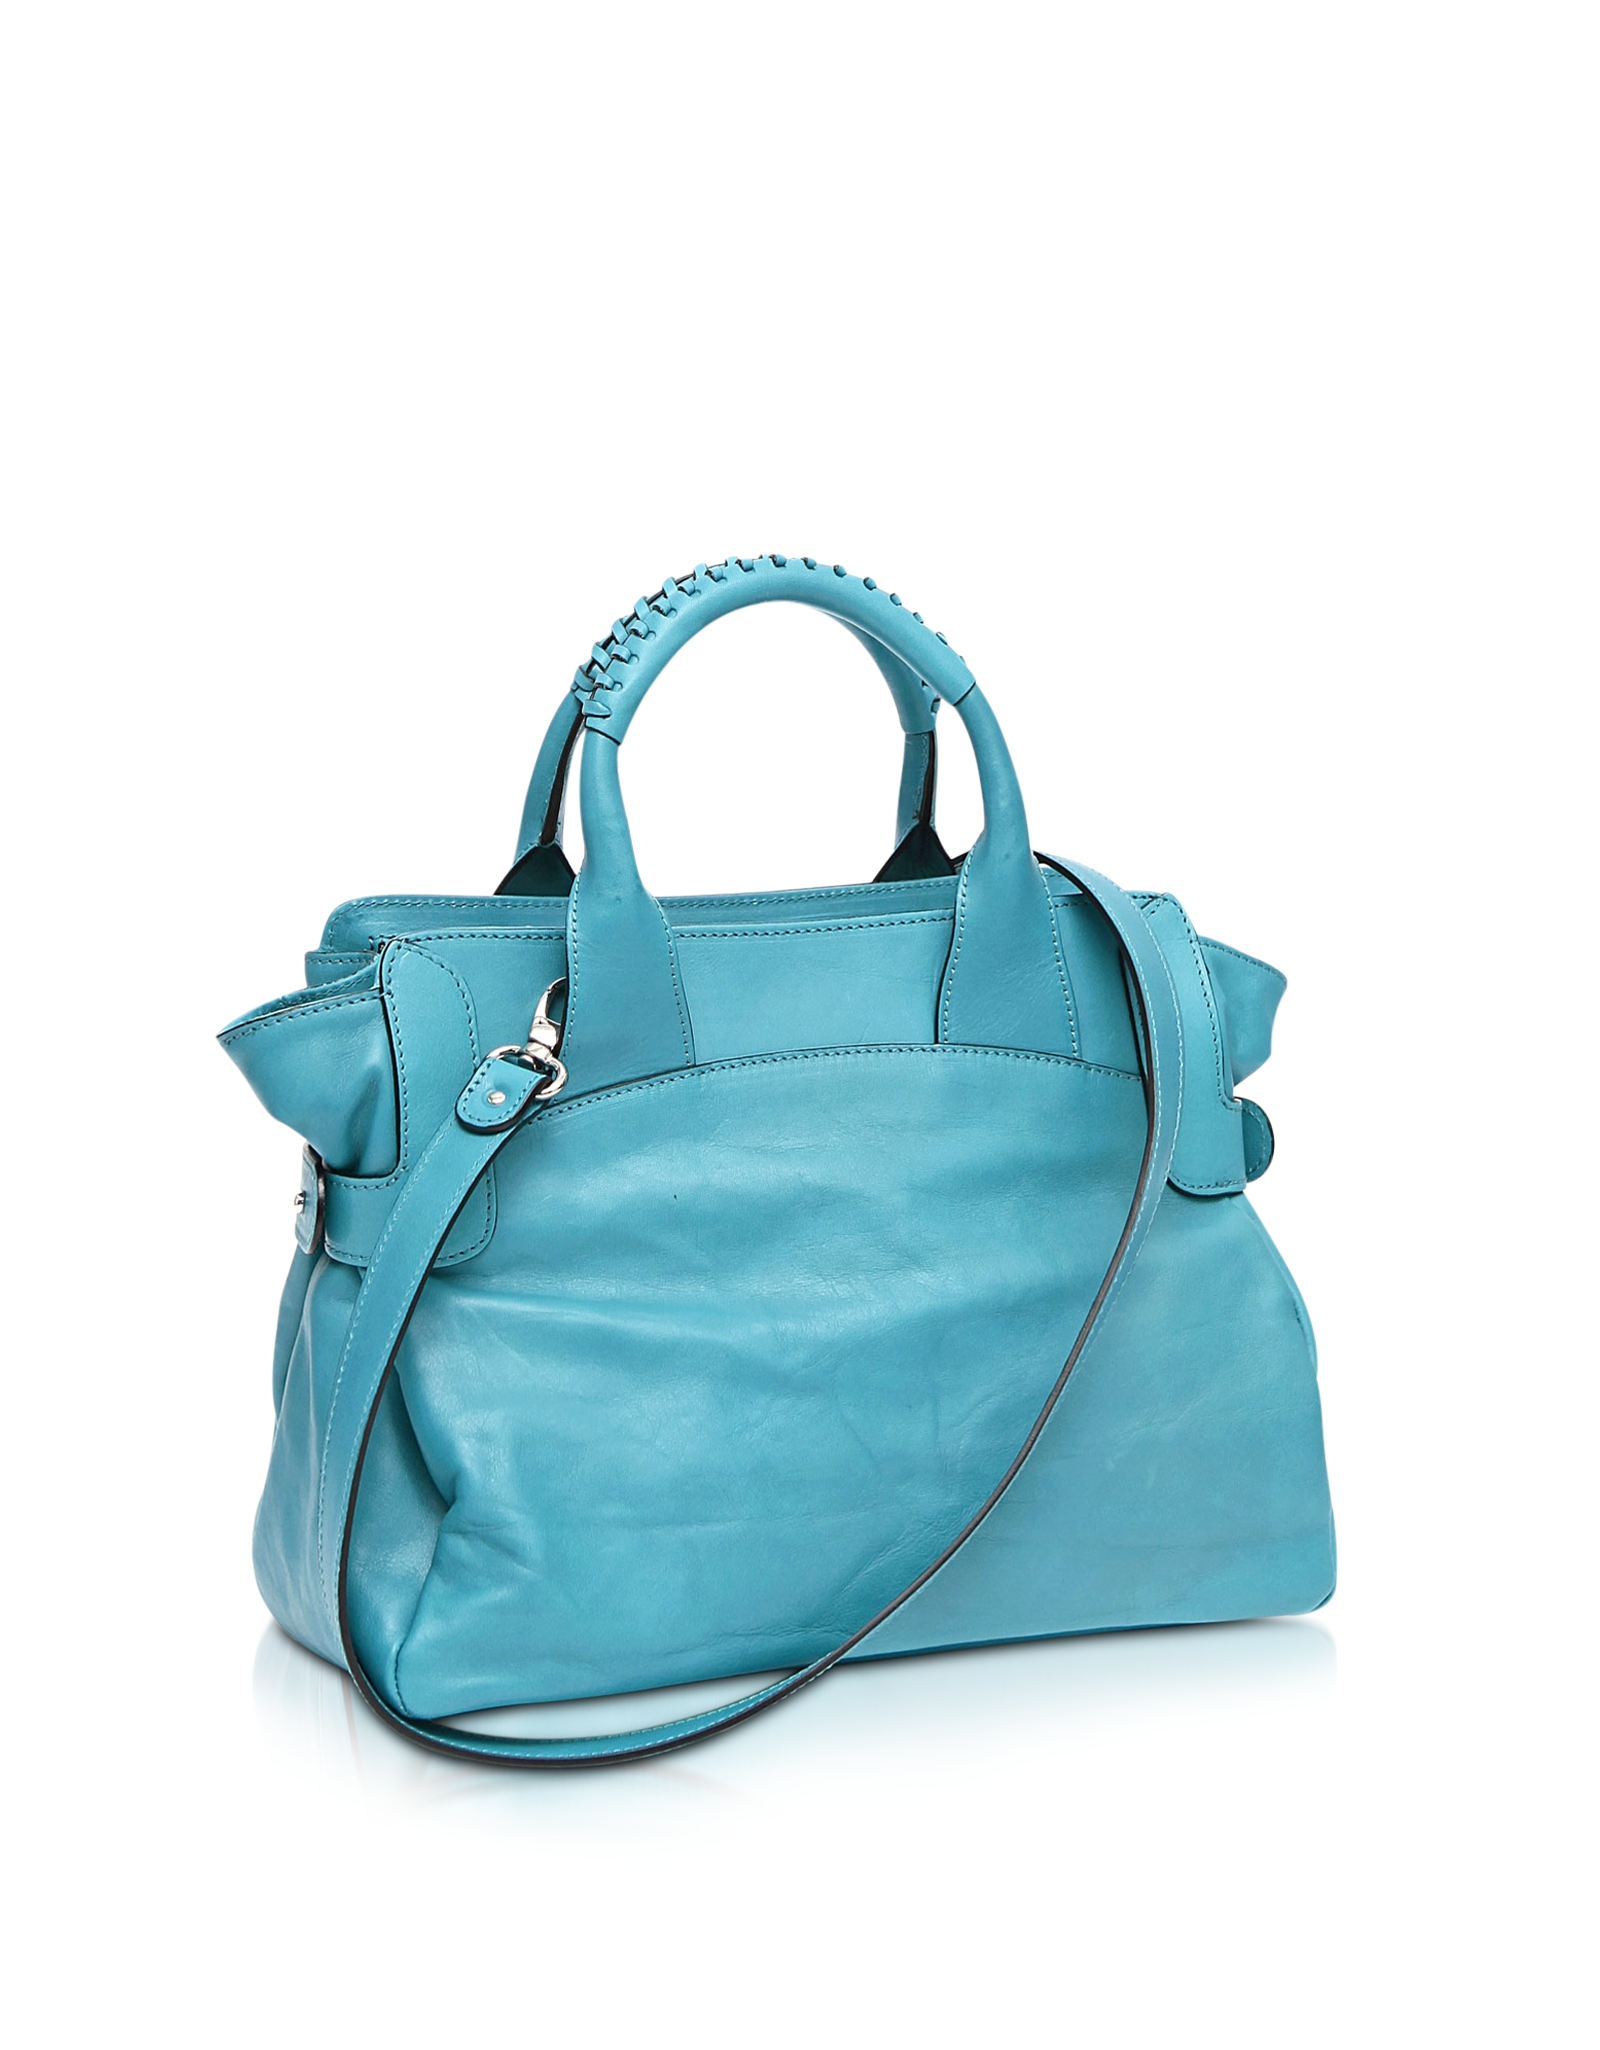 Francesco biasia Camden Small Leather Tote Bag W/shoulder Strap in Teal ...